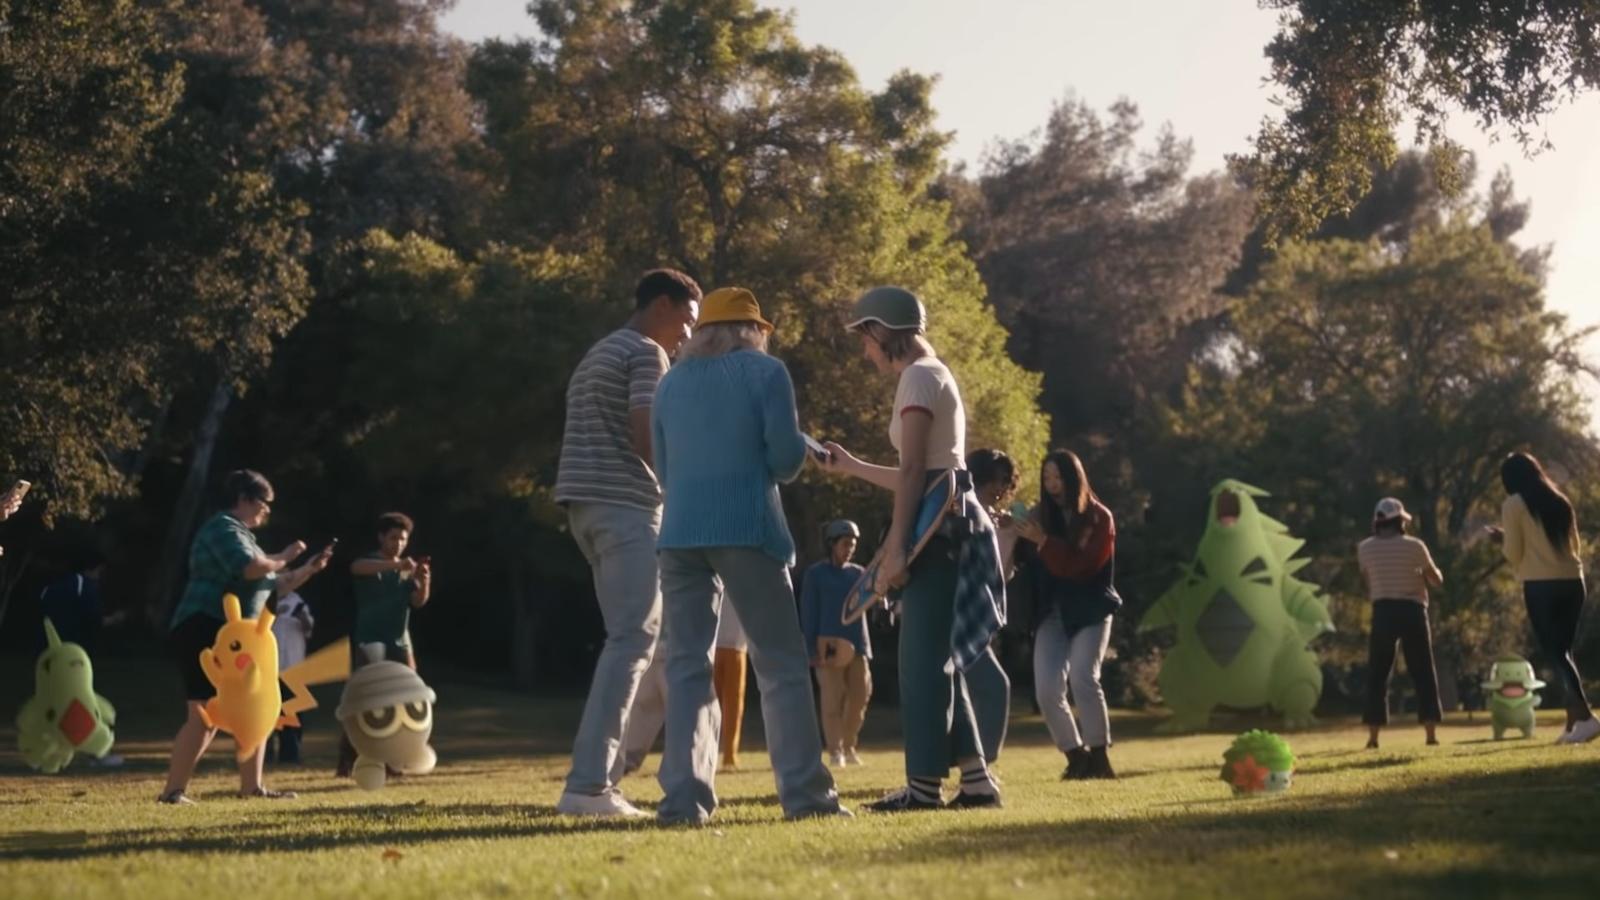 Pokemon Go players playing in a field next to numerous Pokemon.